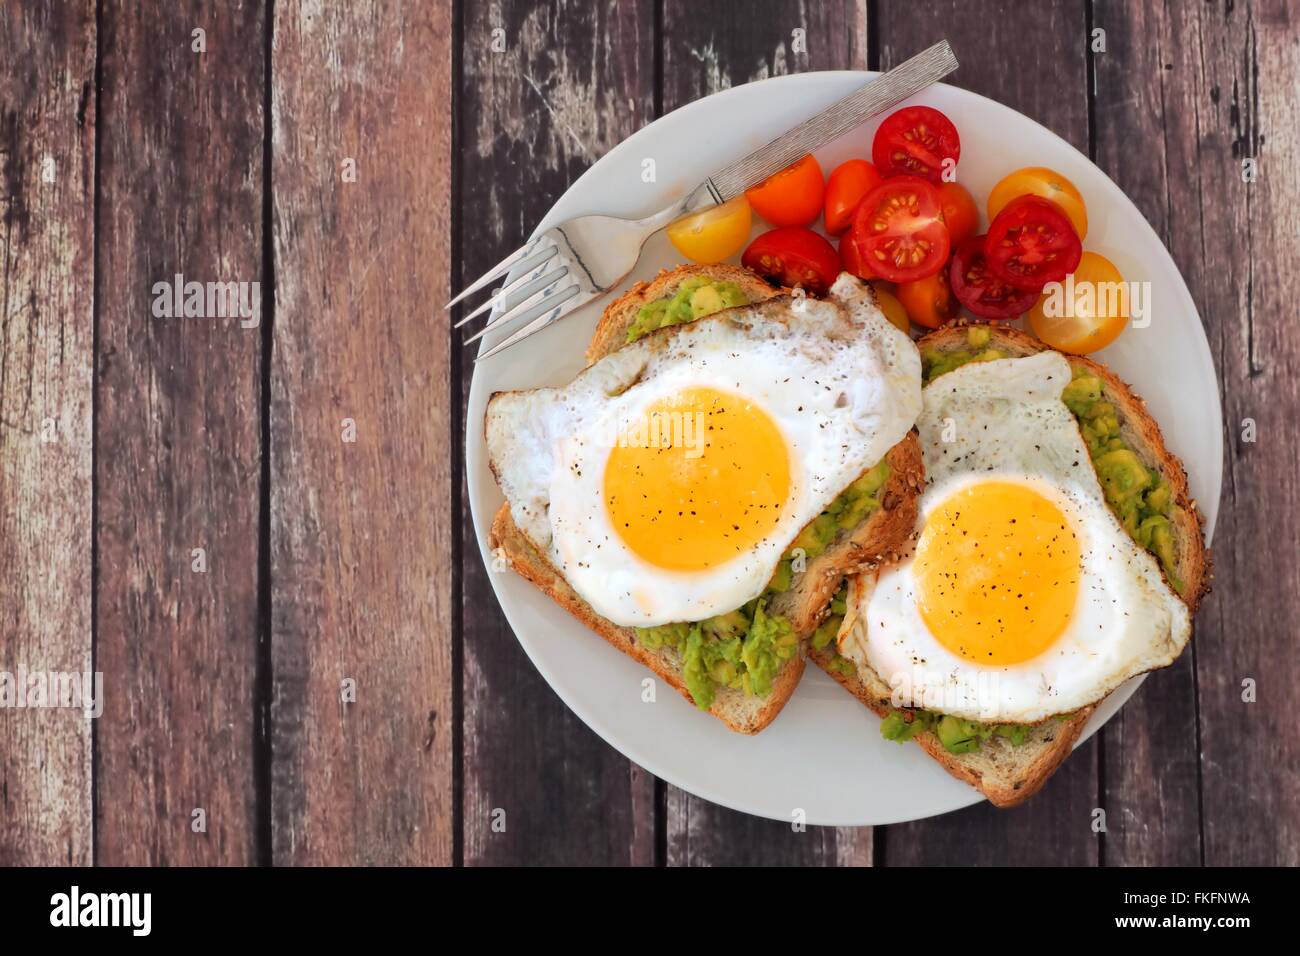 Healthy avocado, egg open sandwiches on a plate with colorful tomatoes against a rustic wood background Stock Photo